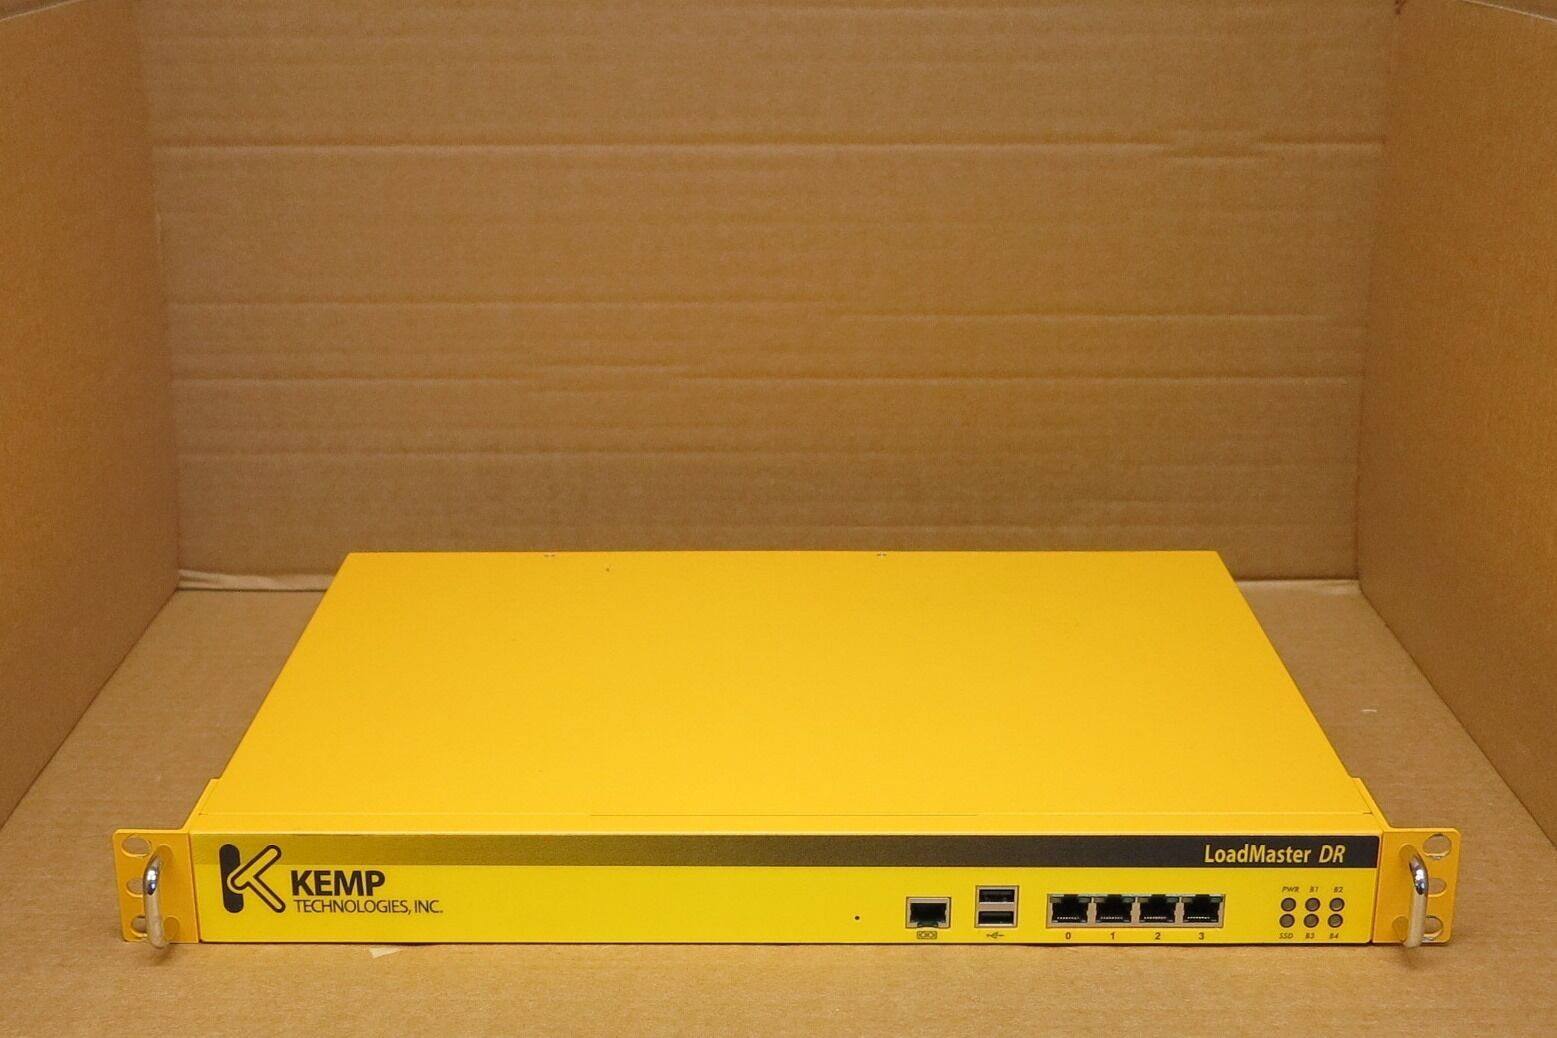 Kemp LoadMaster DR Disaster Recovery Multi-Site Load Balancer NSA1041N7-LM2000